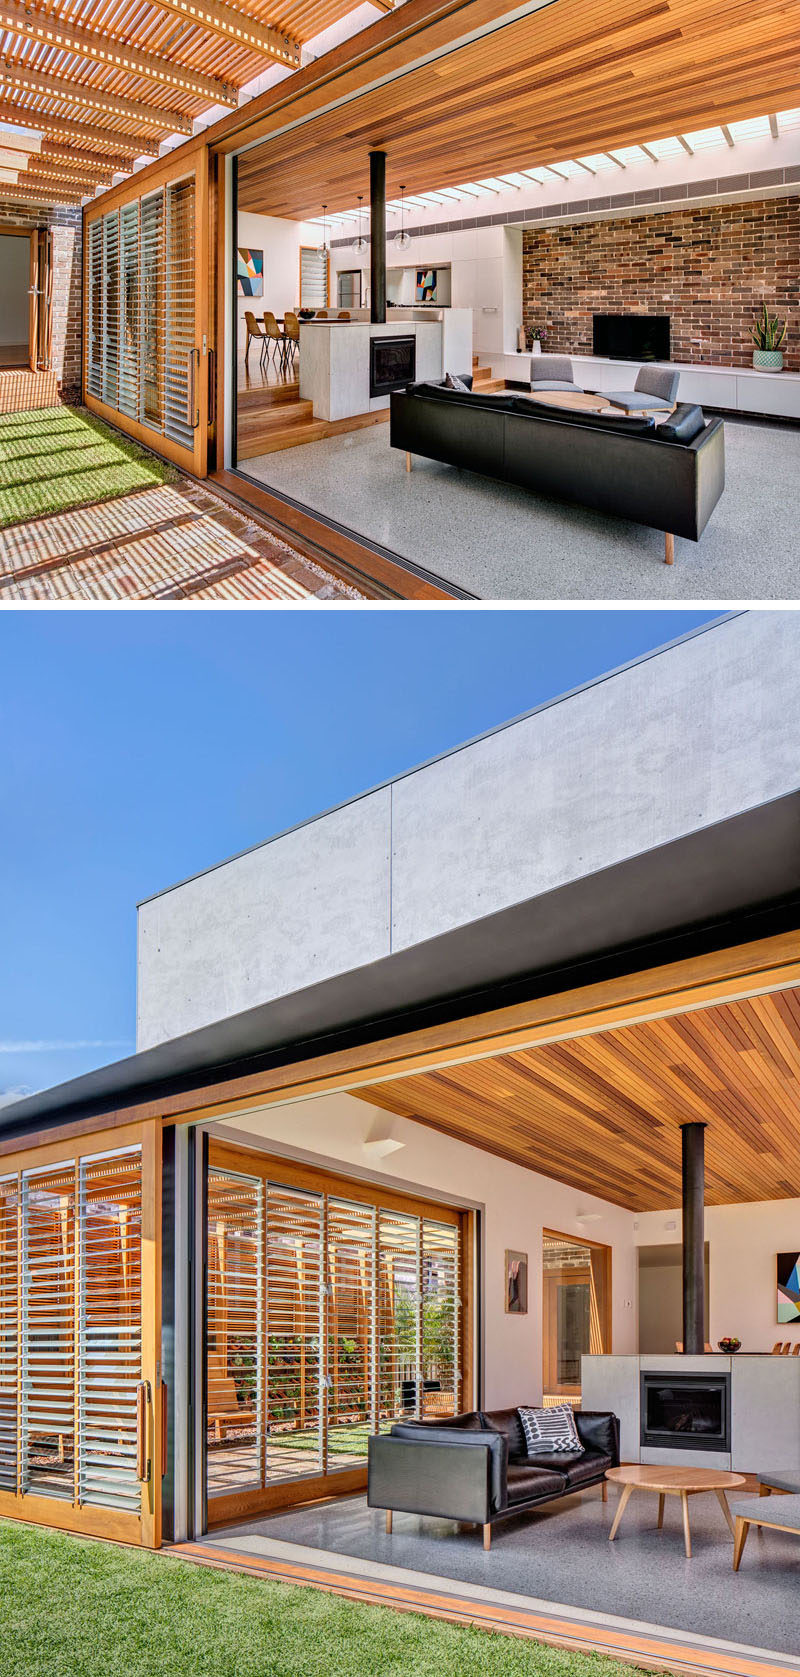 An oversized sliding door connect s an outdoor room and the living room, helping to completely close off the living room during winter, while still allowing light to filter in, or be left open in warmer weather. #SlidingDoor #LivingRoom #OutdoorSpace